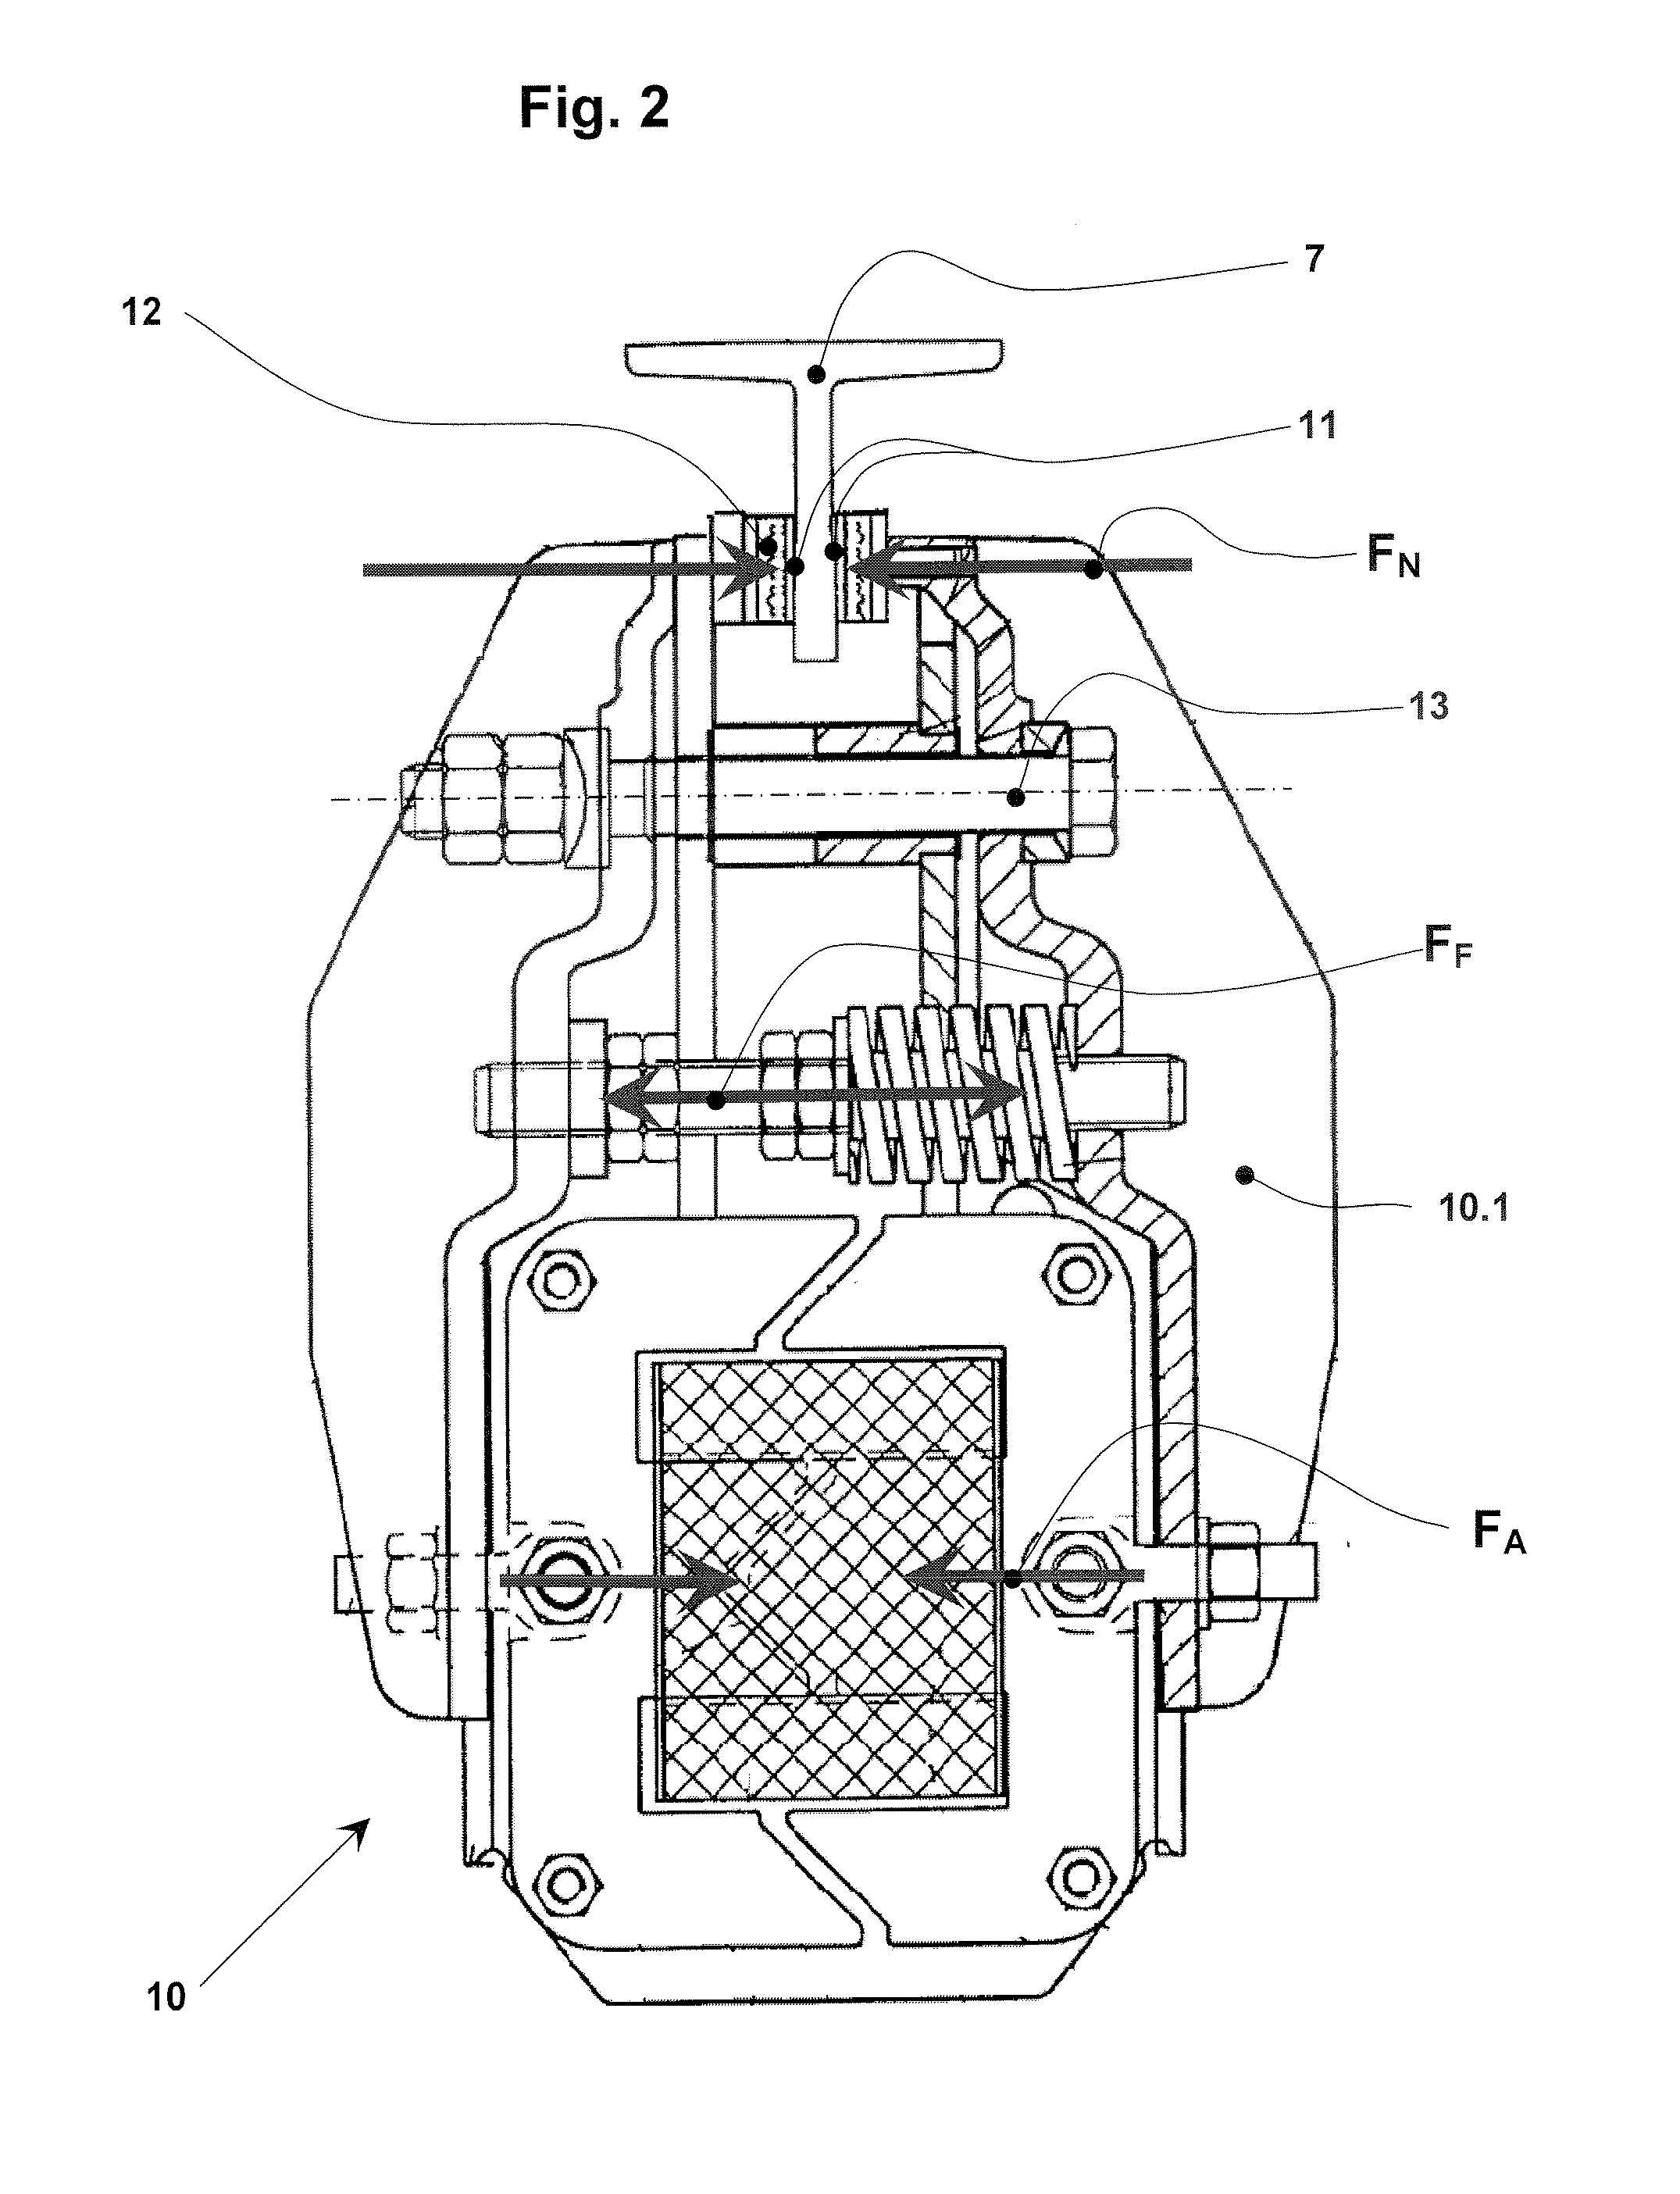 Elevator installation, a guide rail of an elevator installation, brake equipment of an elevator installation and a method for guiding, holding and braking an elevator installation